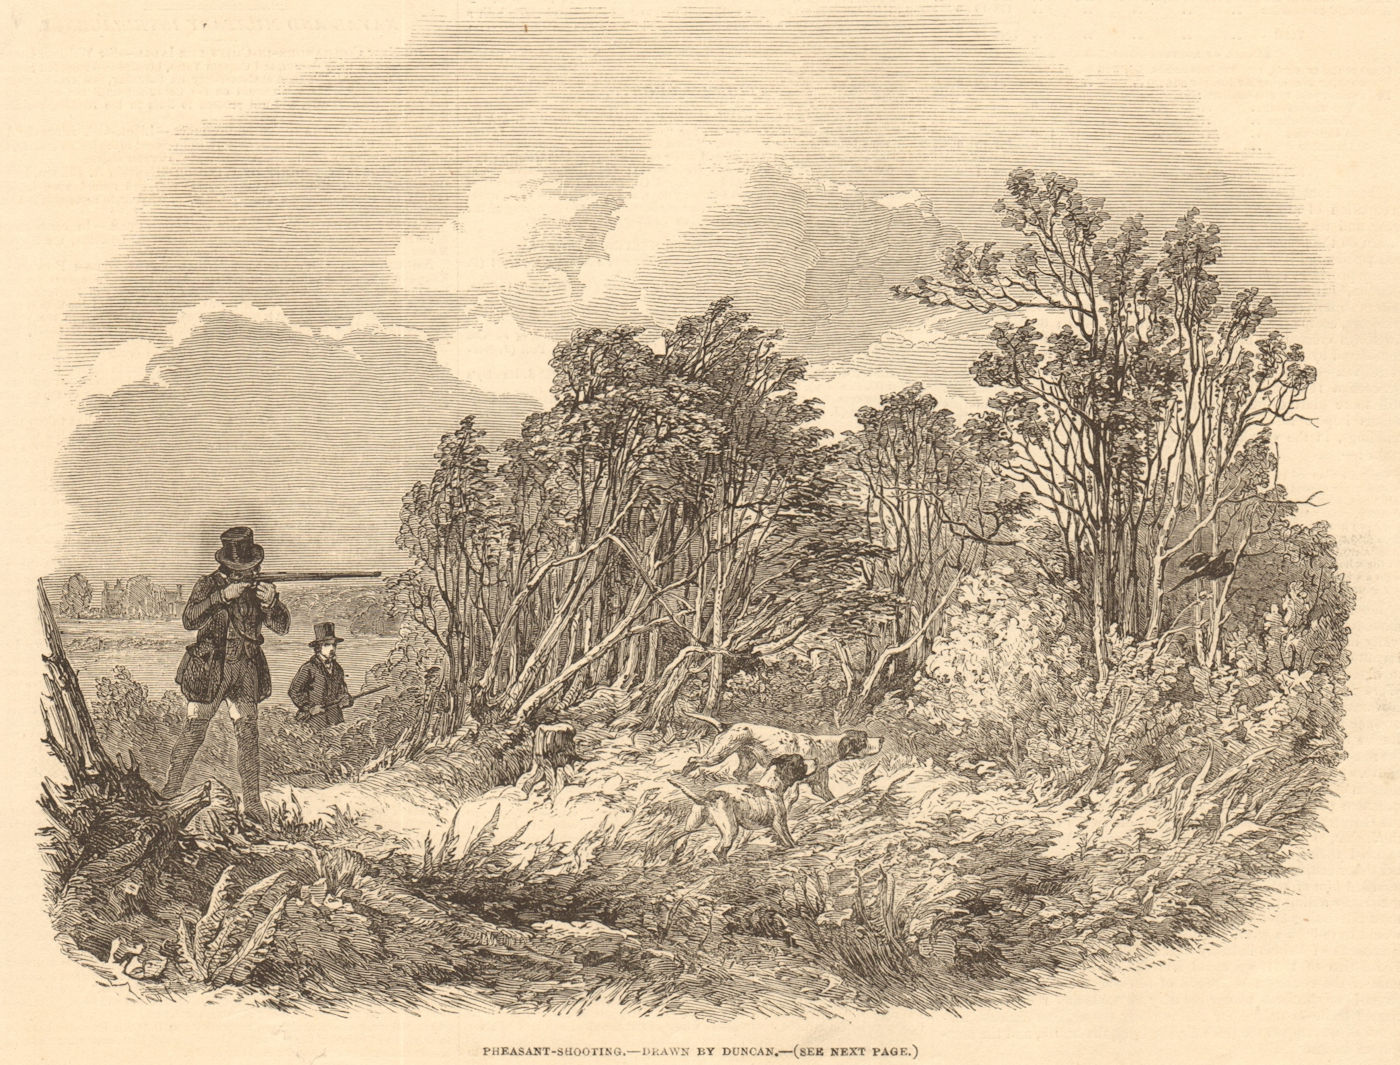 Associate Product Pheasant-shooting - drawn by Duncan. England. Hunting 1850 old antique print